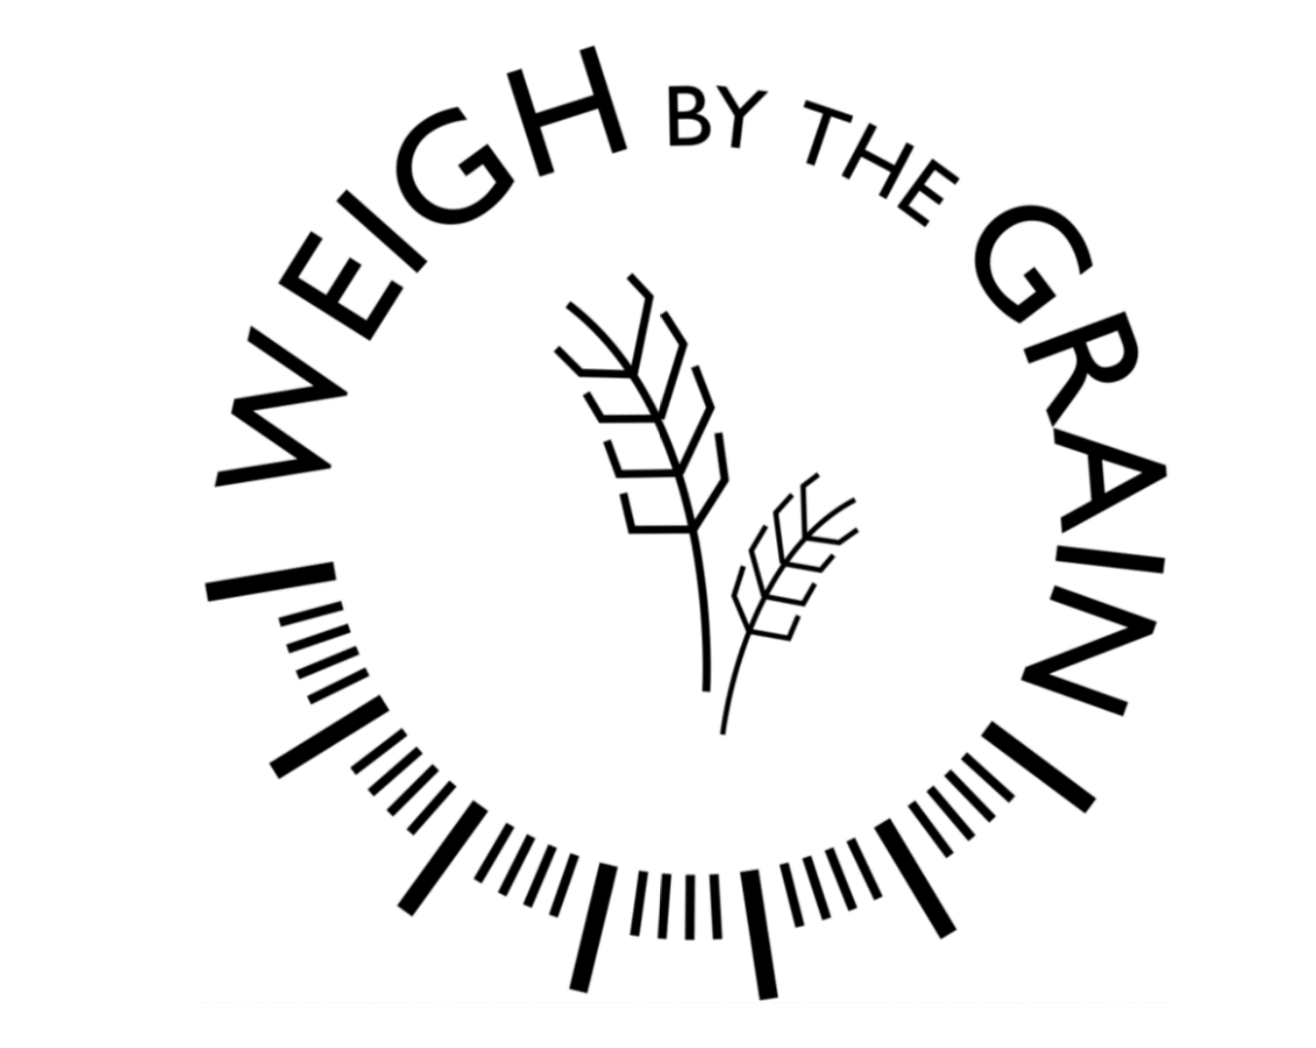 Weight by the grain